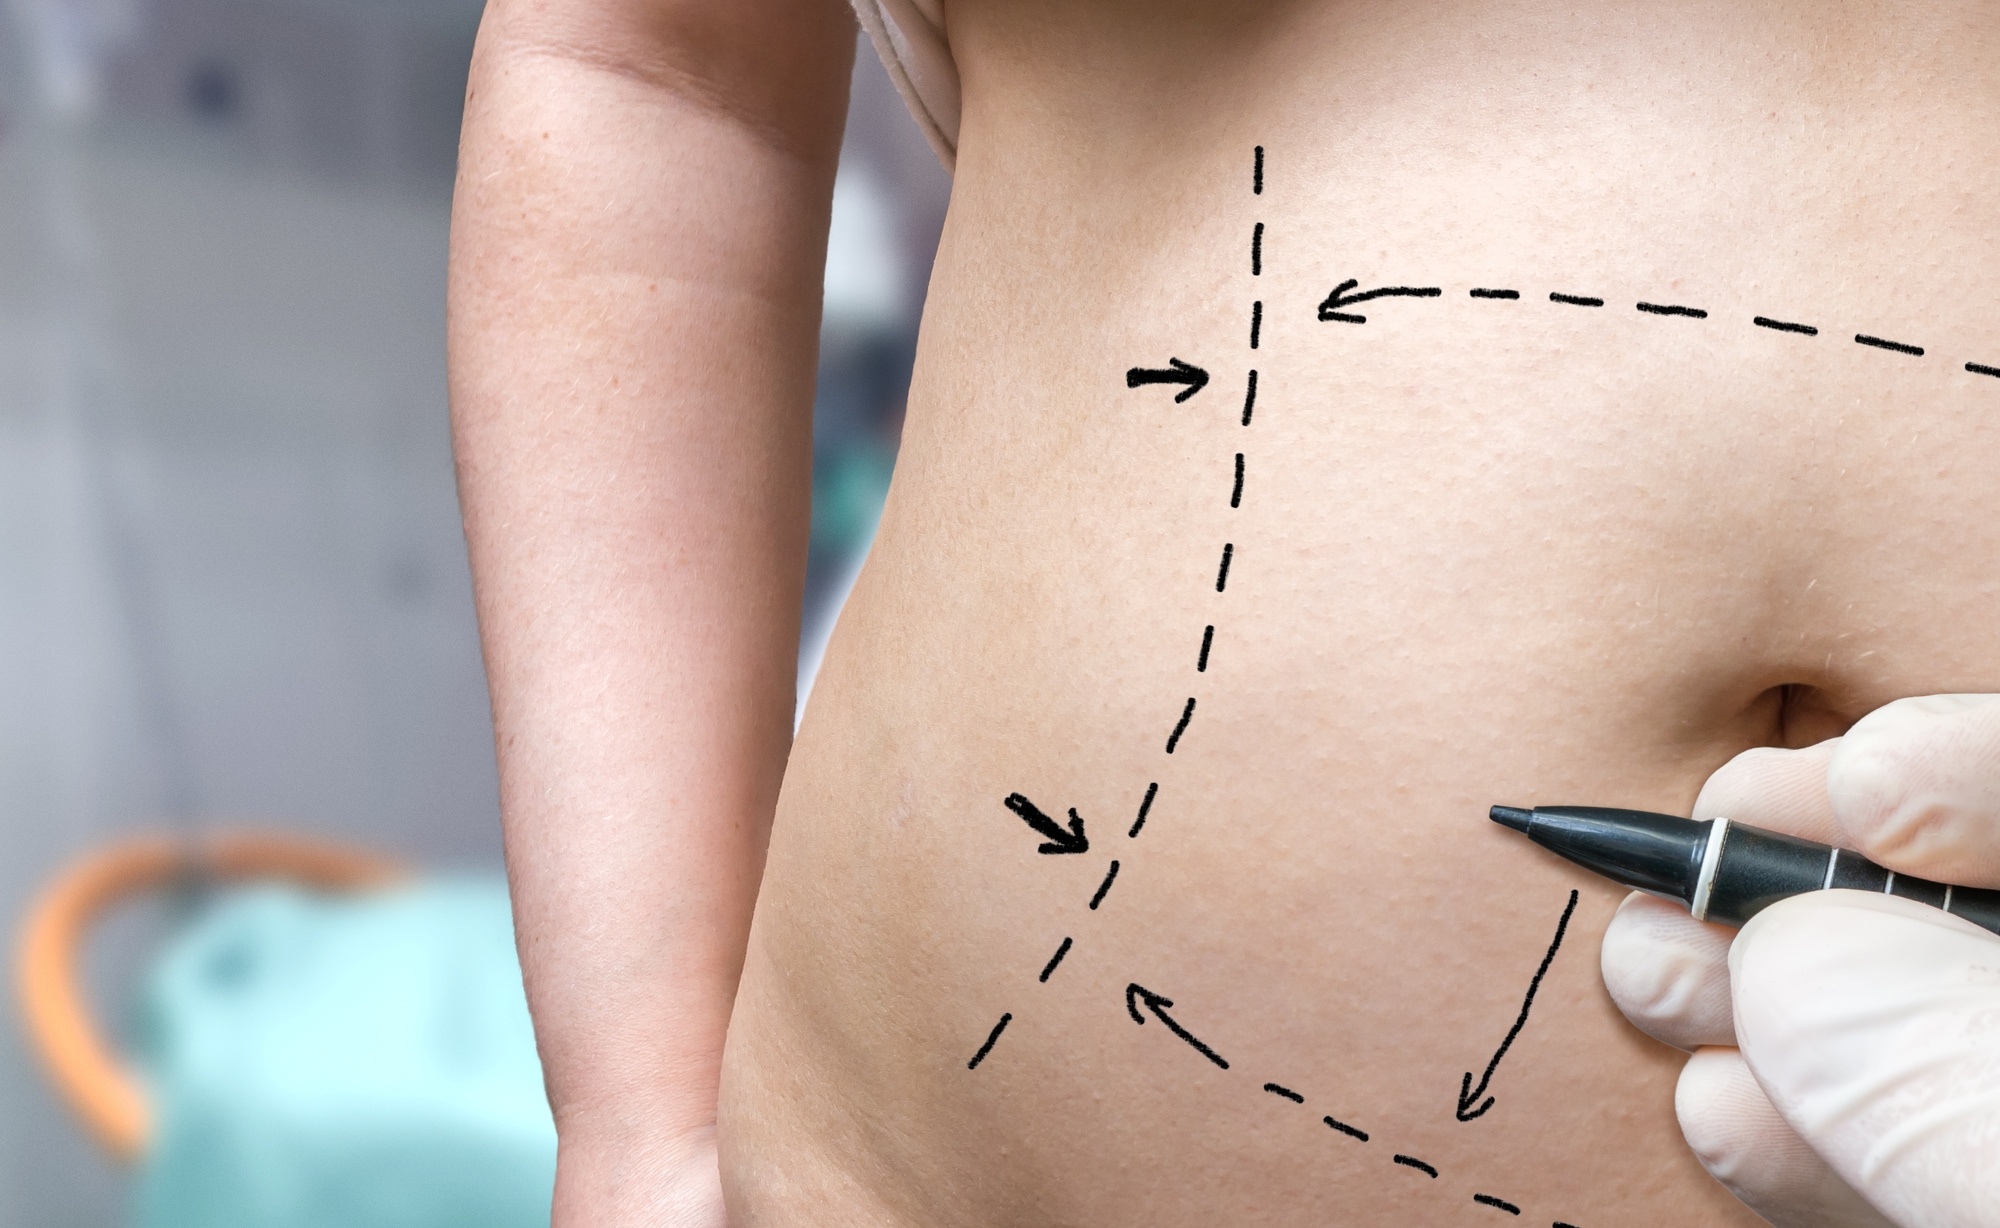 Abdominoplasty vs Panniculectomy: What Are the Differences?